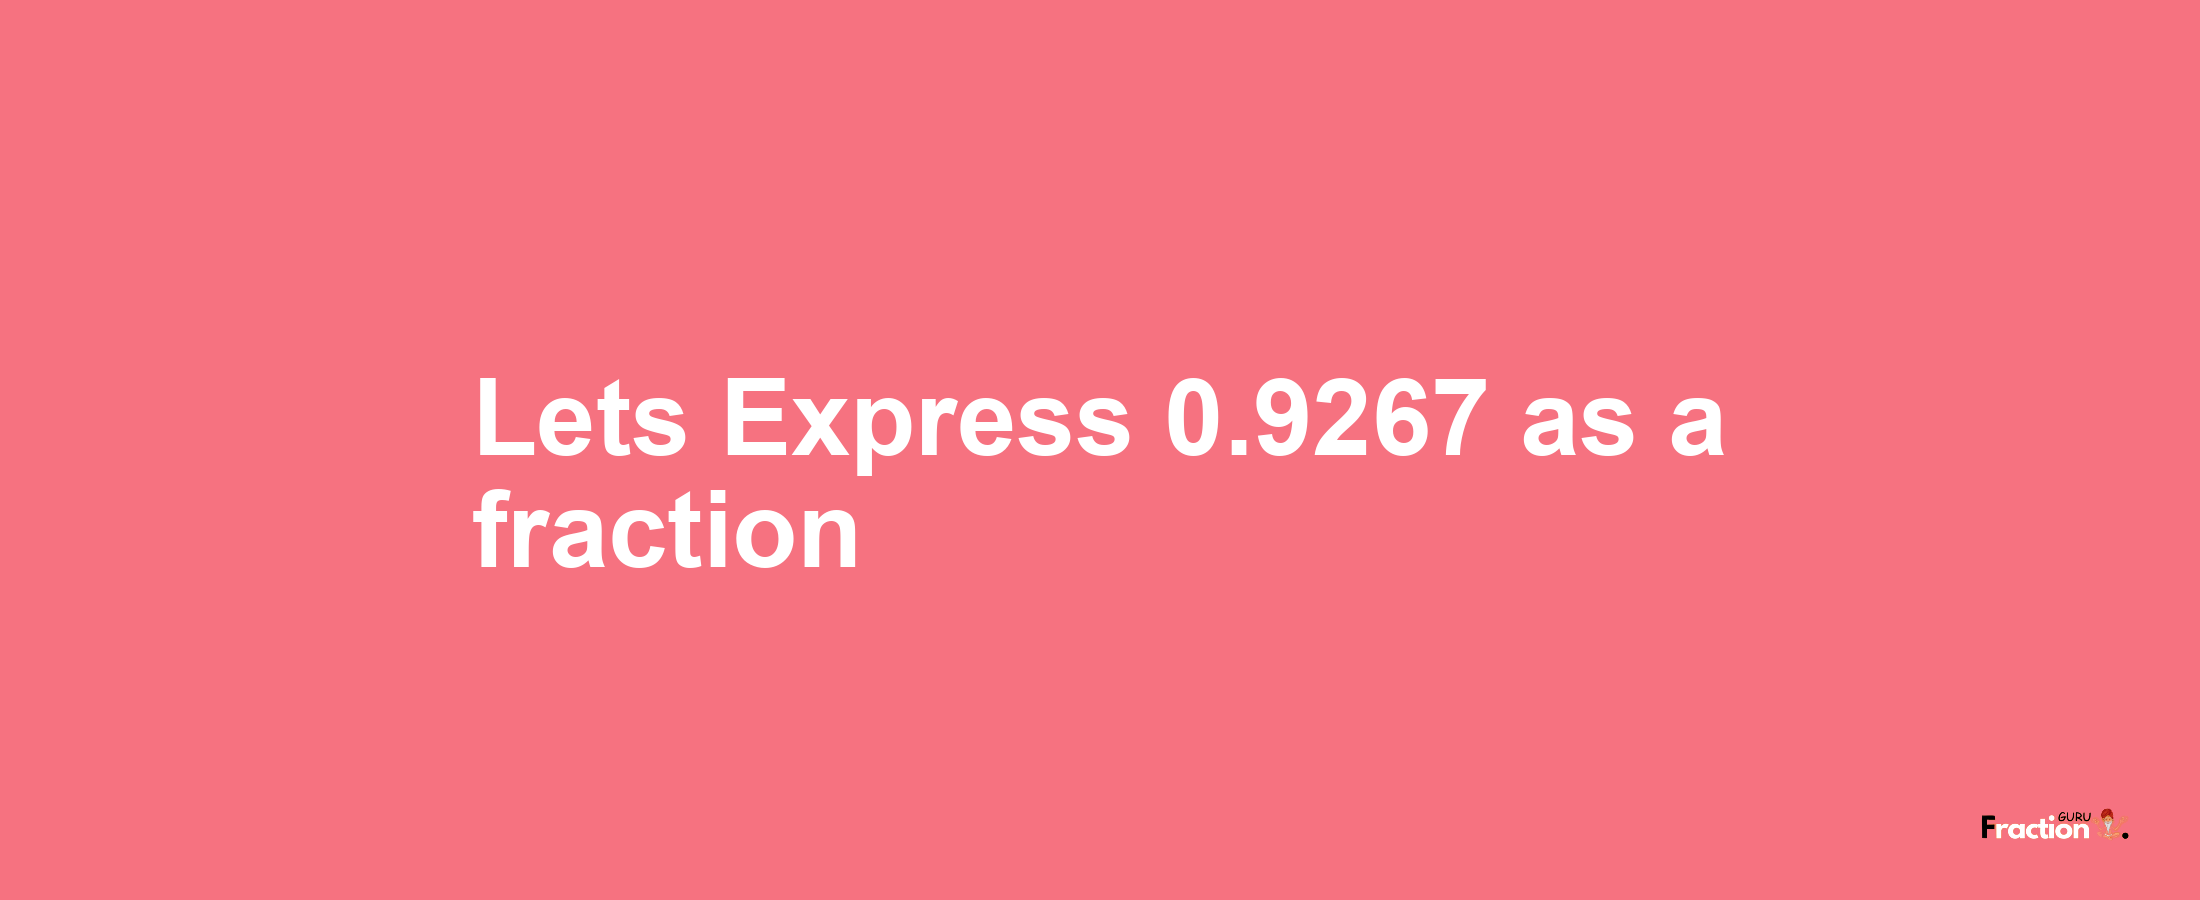 Lets Express 0.9267 as afraction